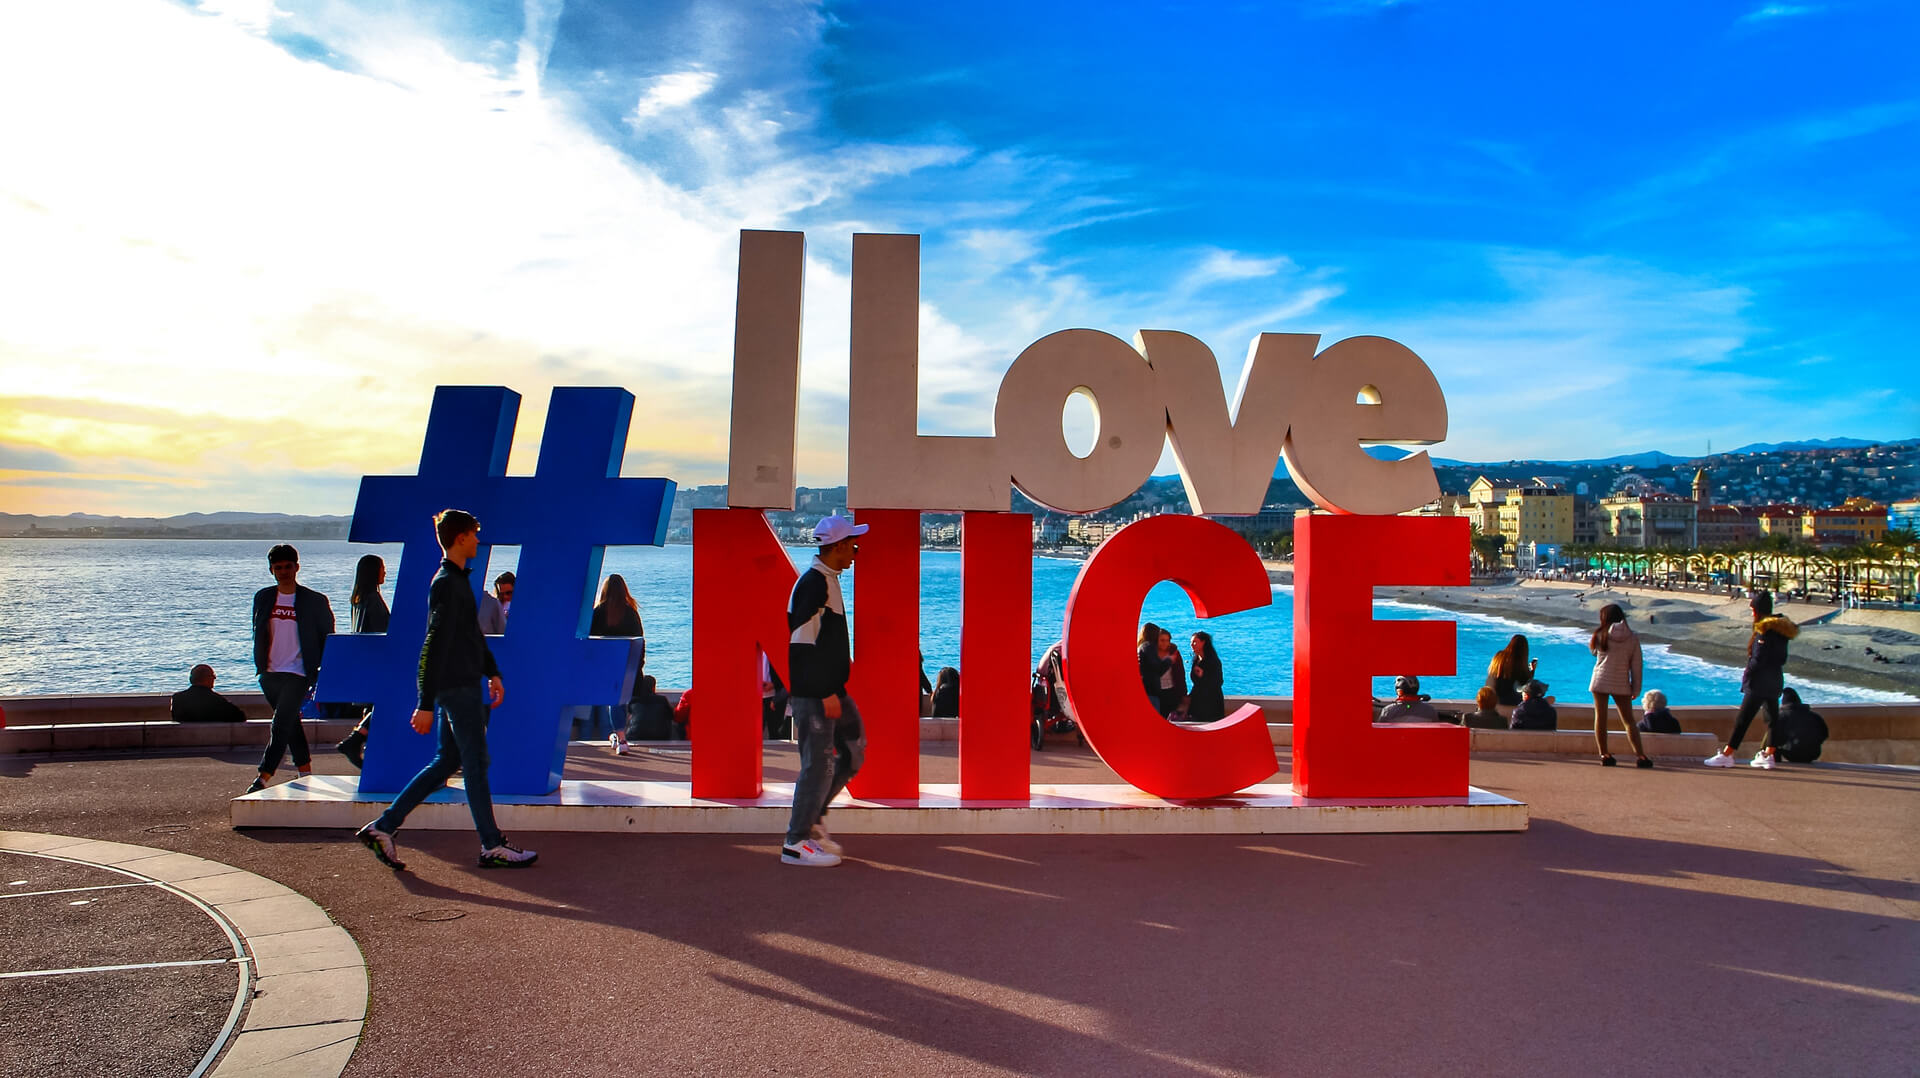 Nice, France: Tourists taking pictures at the "I love Nice" sign with view of Nice cityscape, the Mediterranean and the Promenade des Anglais.